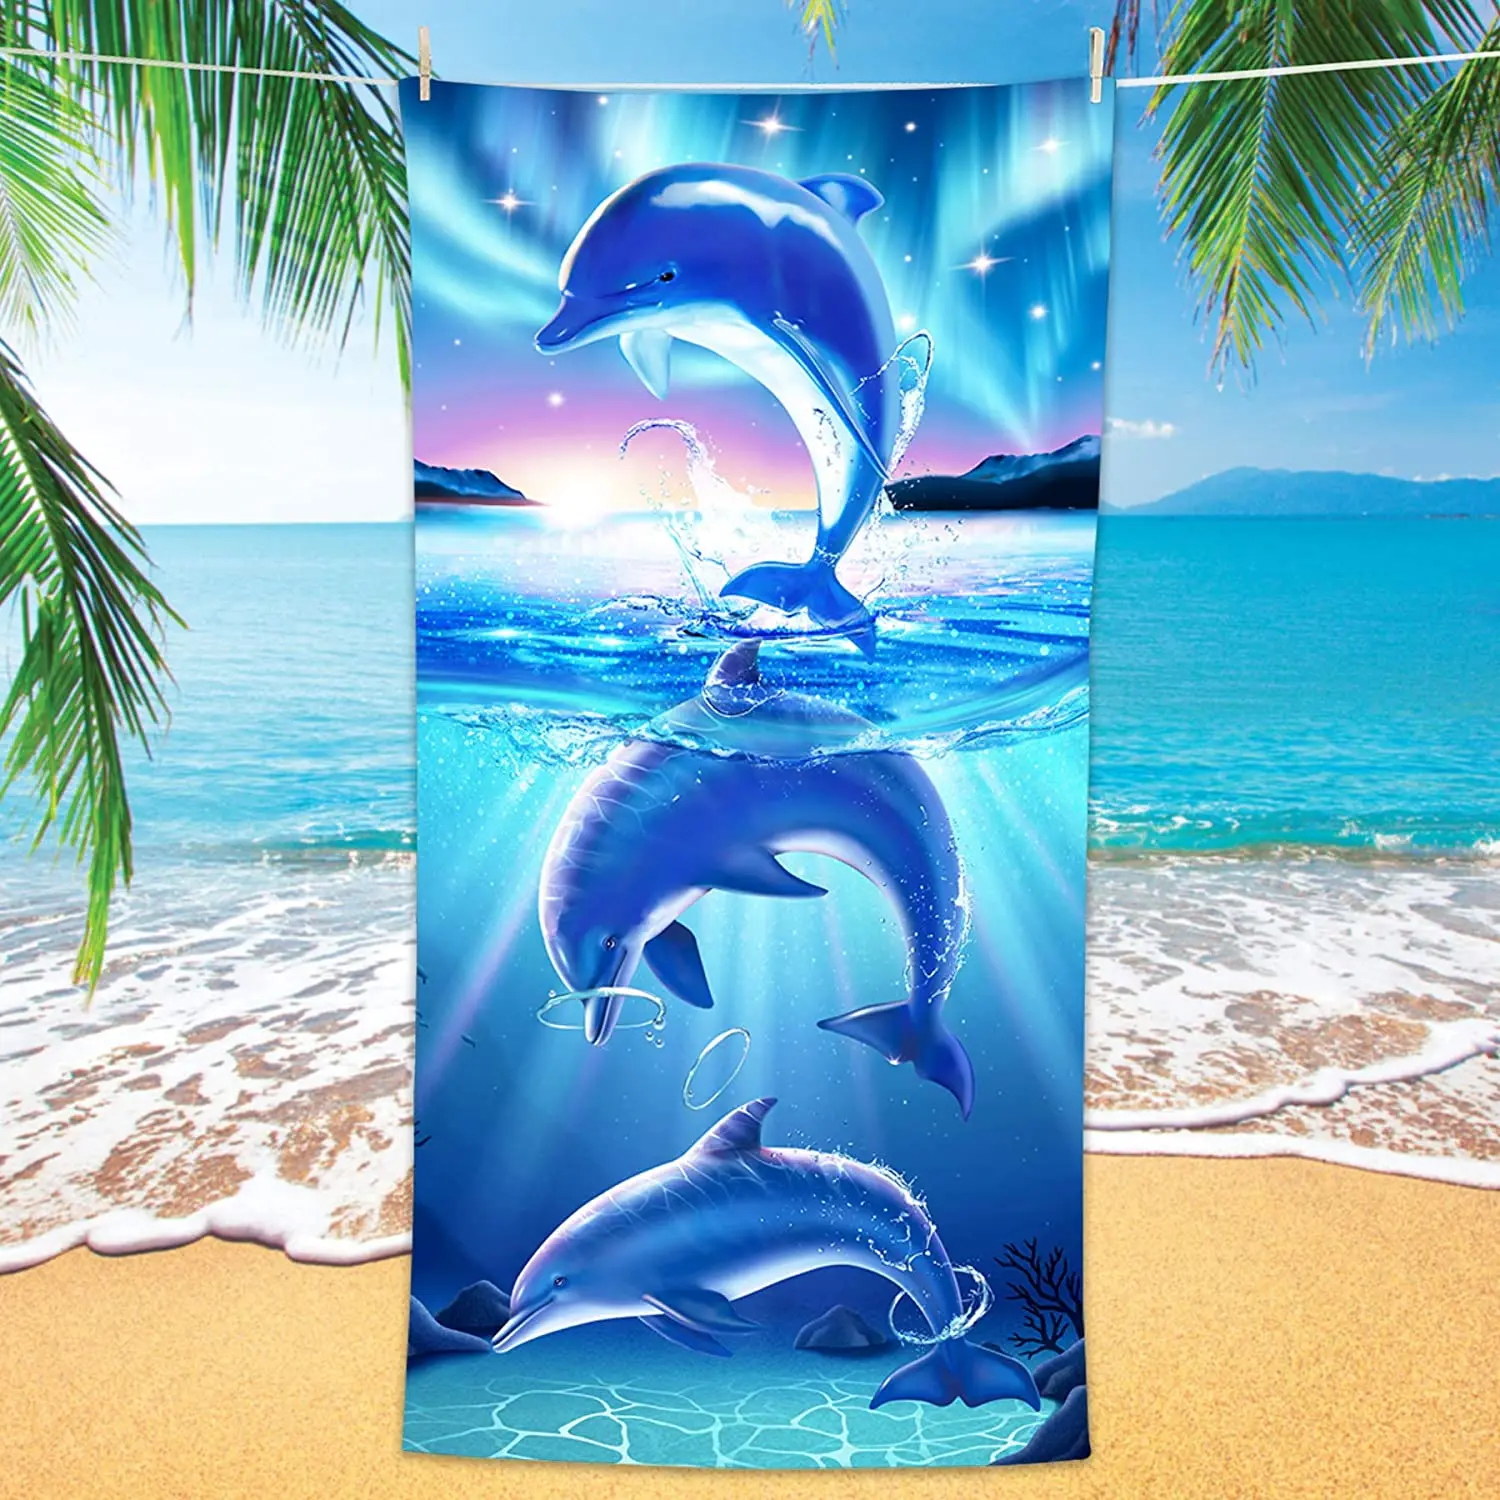 

Dolphin Beach Towel Cute Ocean Dolphins Microfiber Bath Towel Funny Abstract Animals Cartoon Sand Free Quick Dry Travel Towels